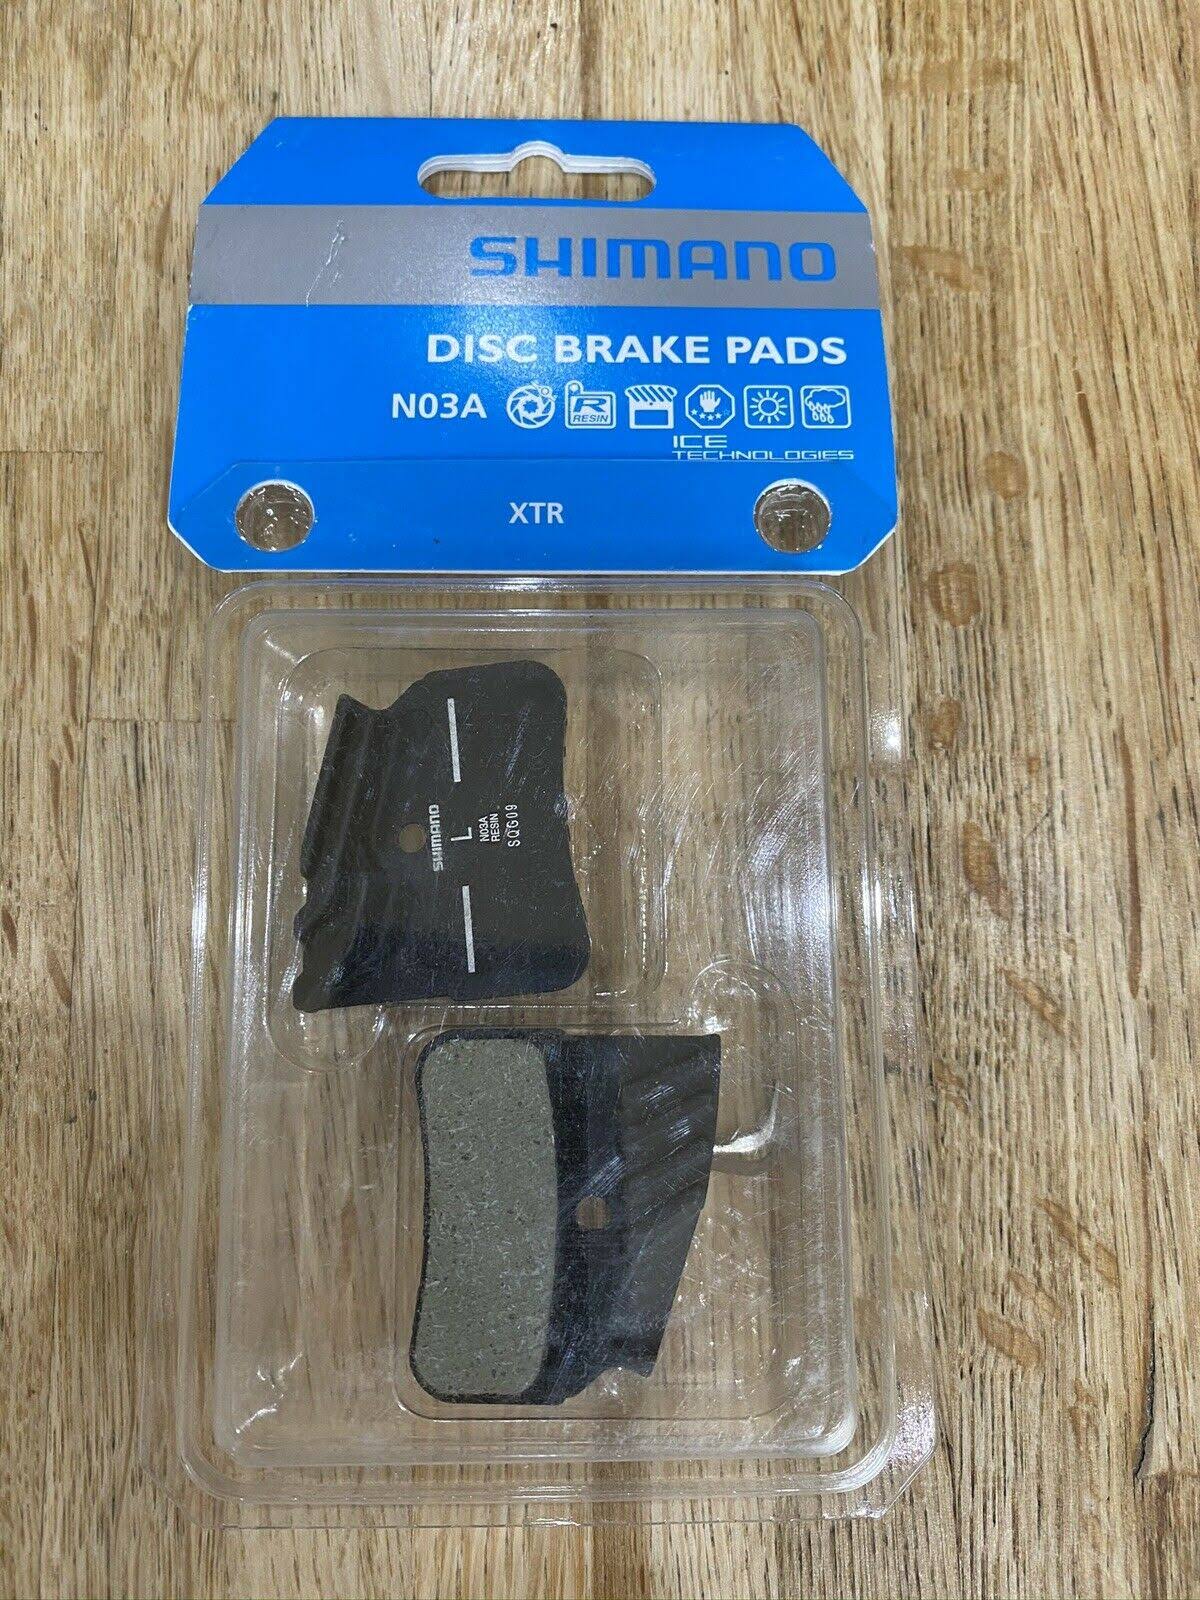 Shimano N03A Finned Resin Disc Brake Pad - with Spring